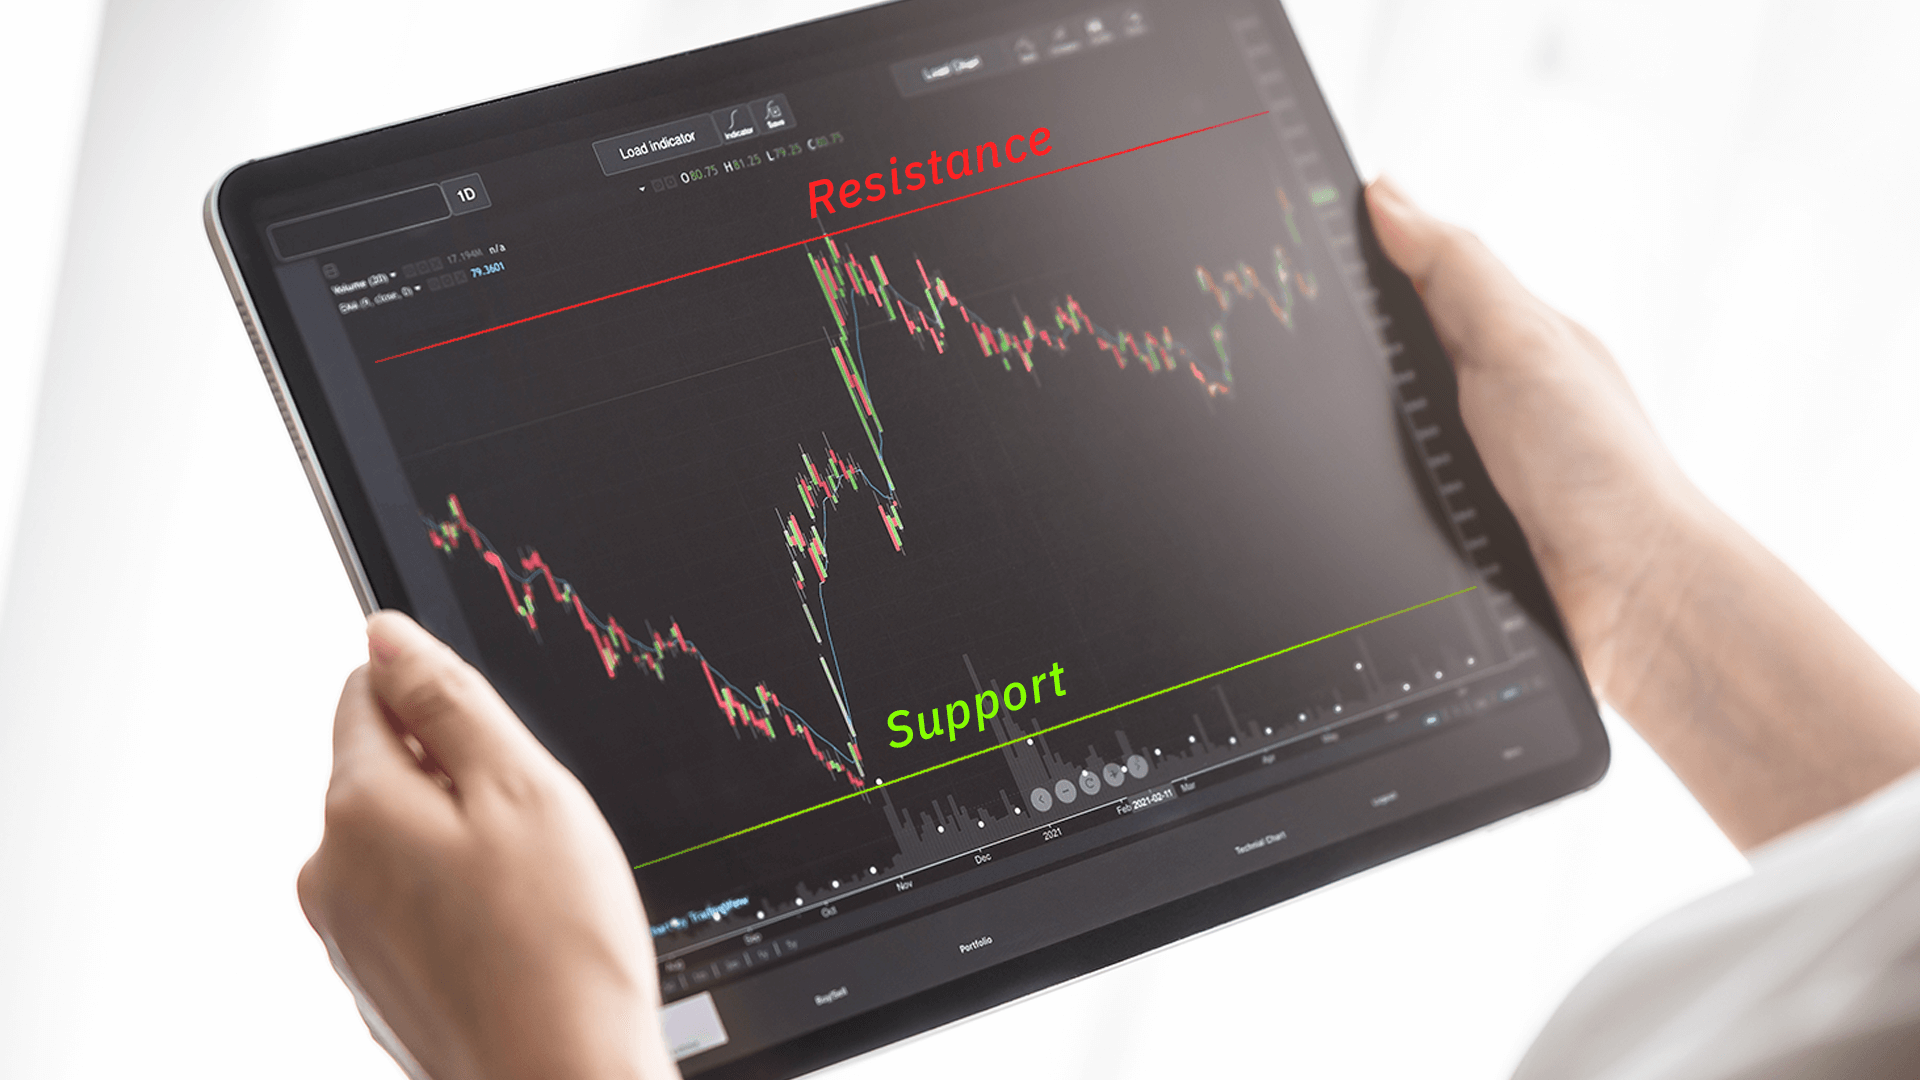 Support and Resistance: Where the Price Is About to Turn